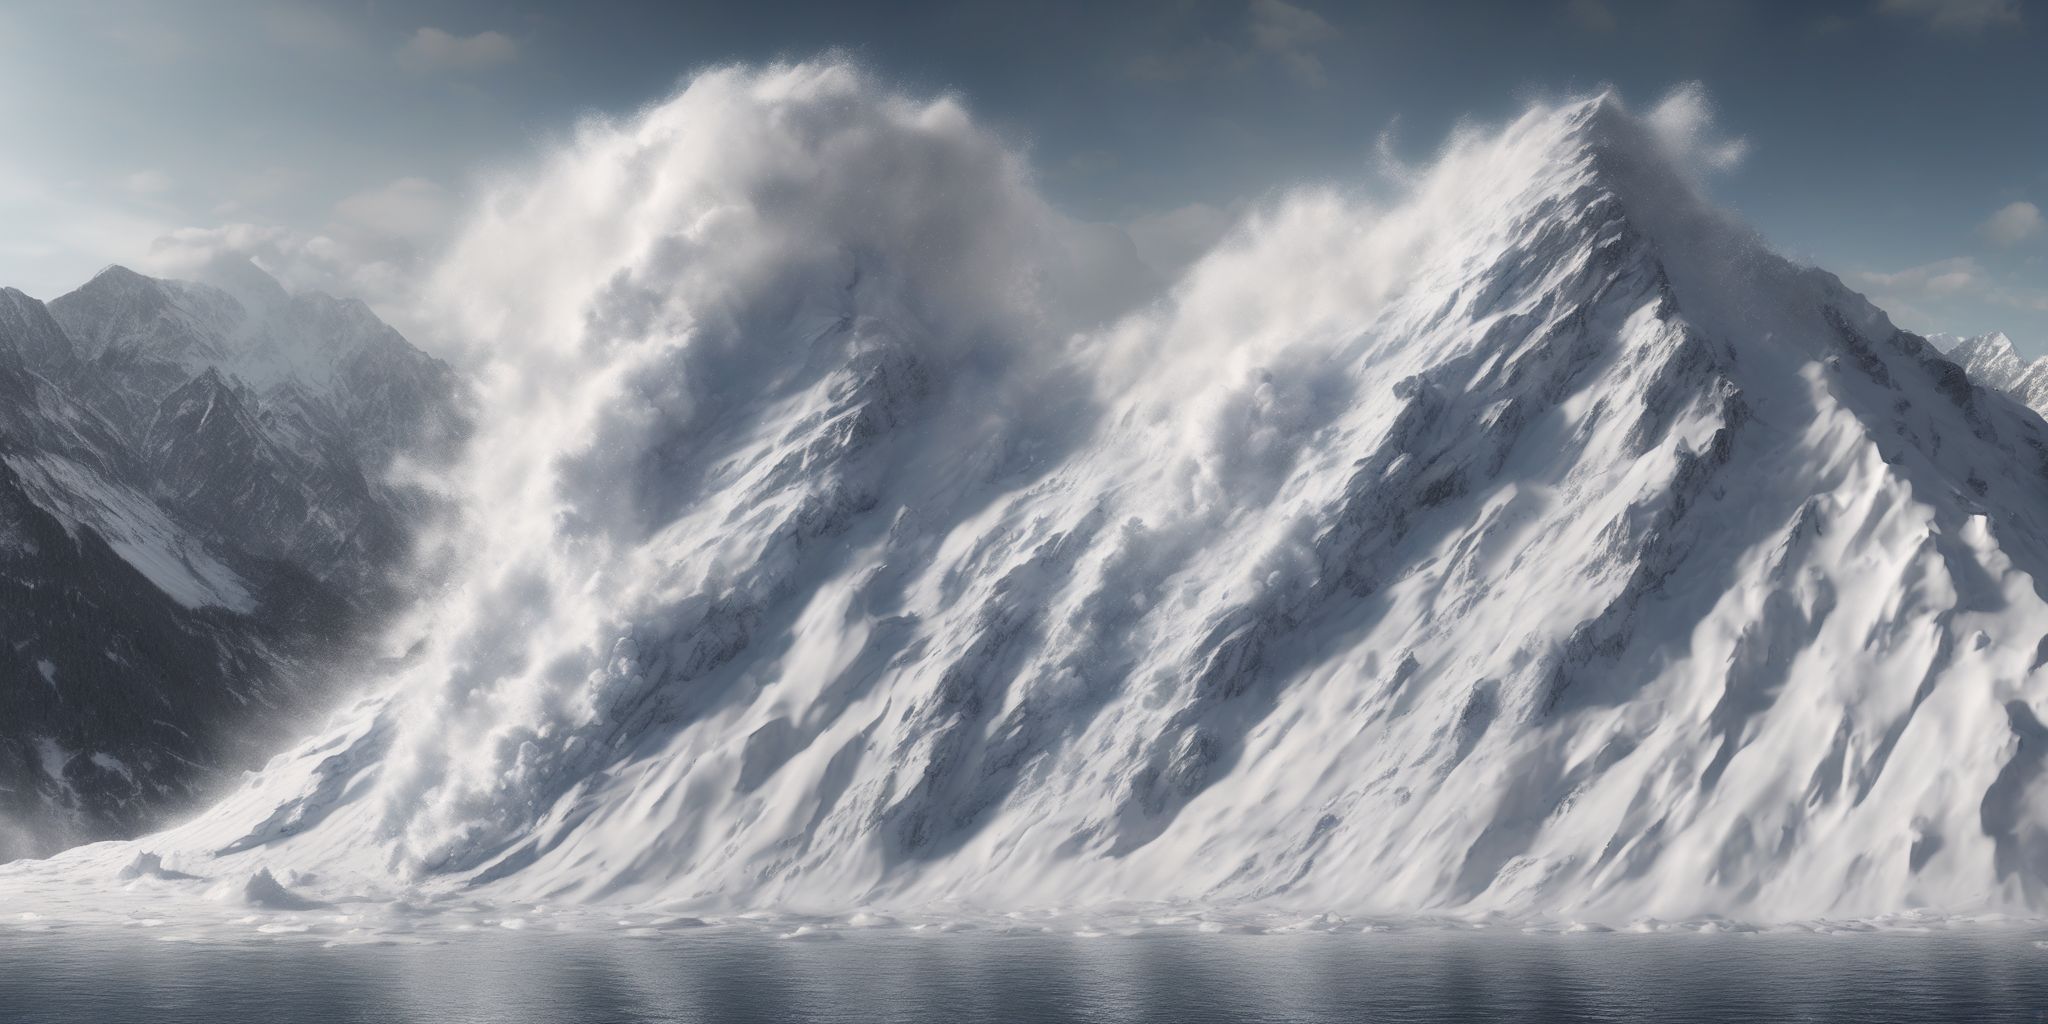 Avalanche  in realistic, photographic style